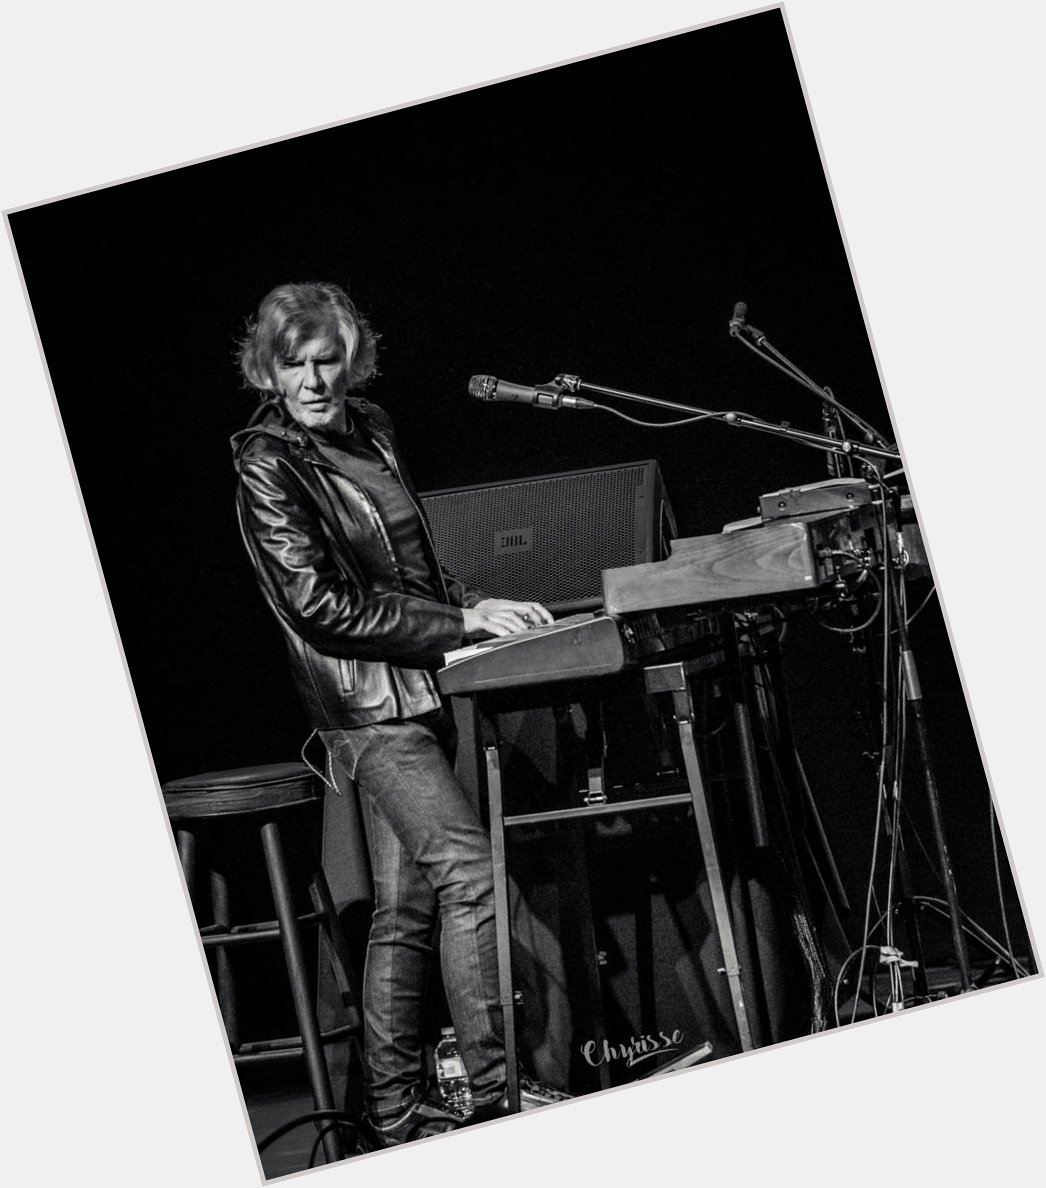 Happy Birthday to Rod Argent, keyboardist for The Zombie & Argent born 6/14/1945.  